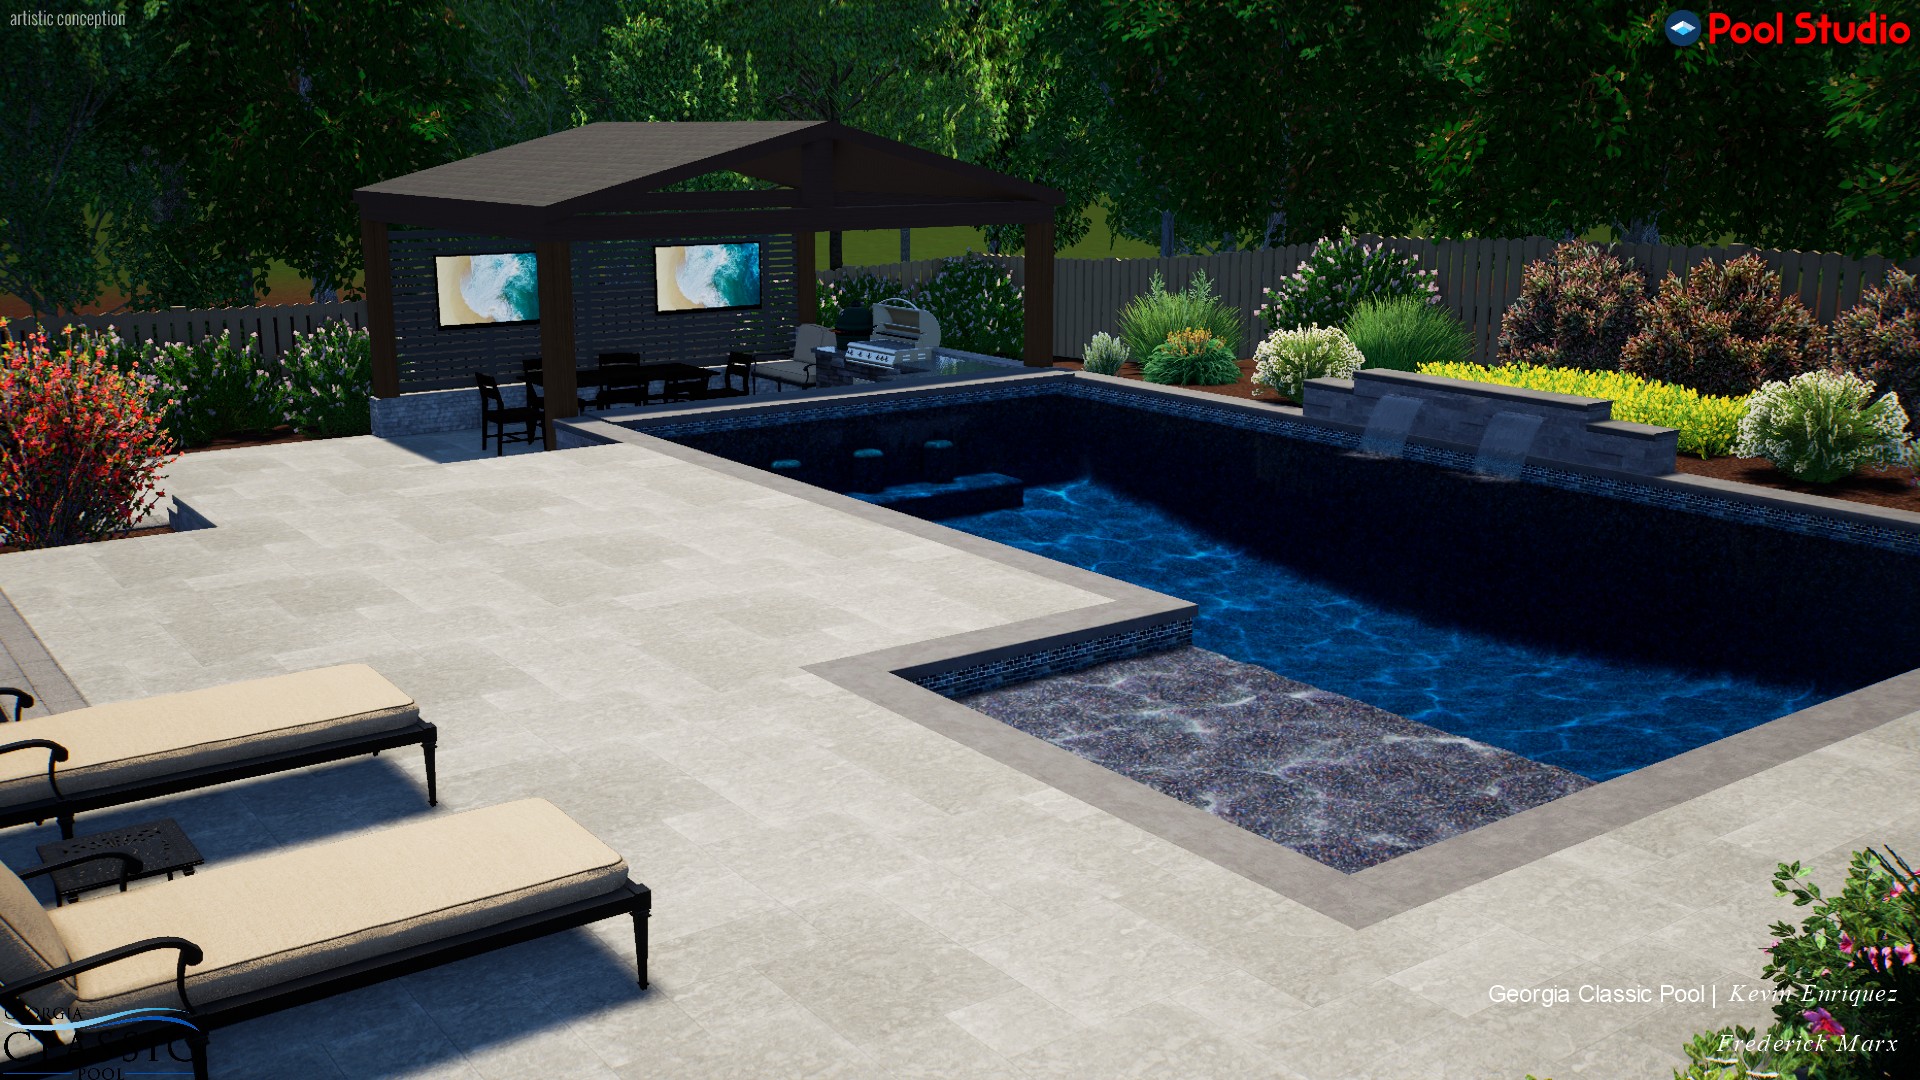 A mesmerizing 3D swimming pool design featuring a sunken cabana, creating a luxurious and secluded retreat for ultimate relaxation.